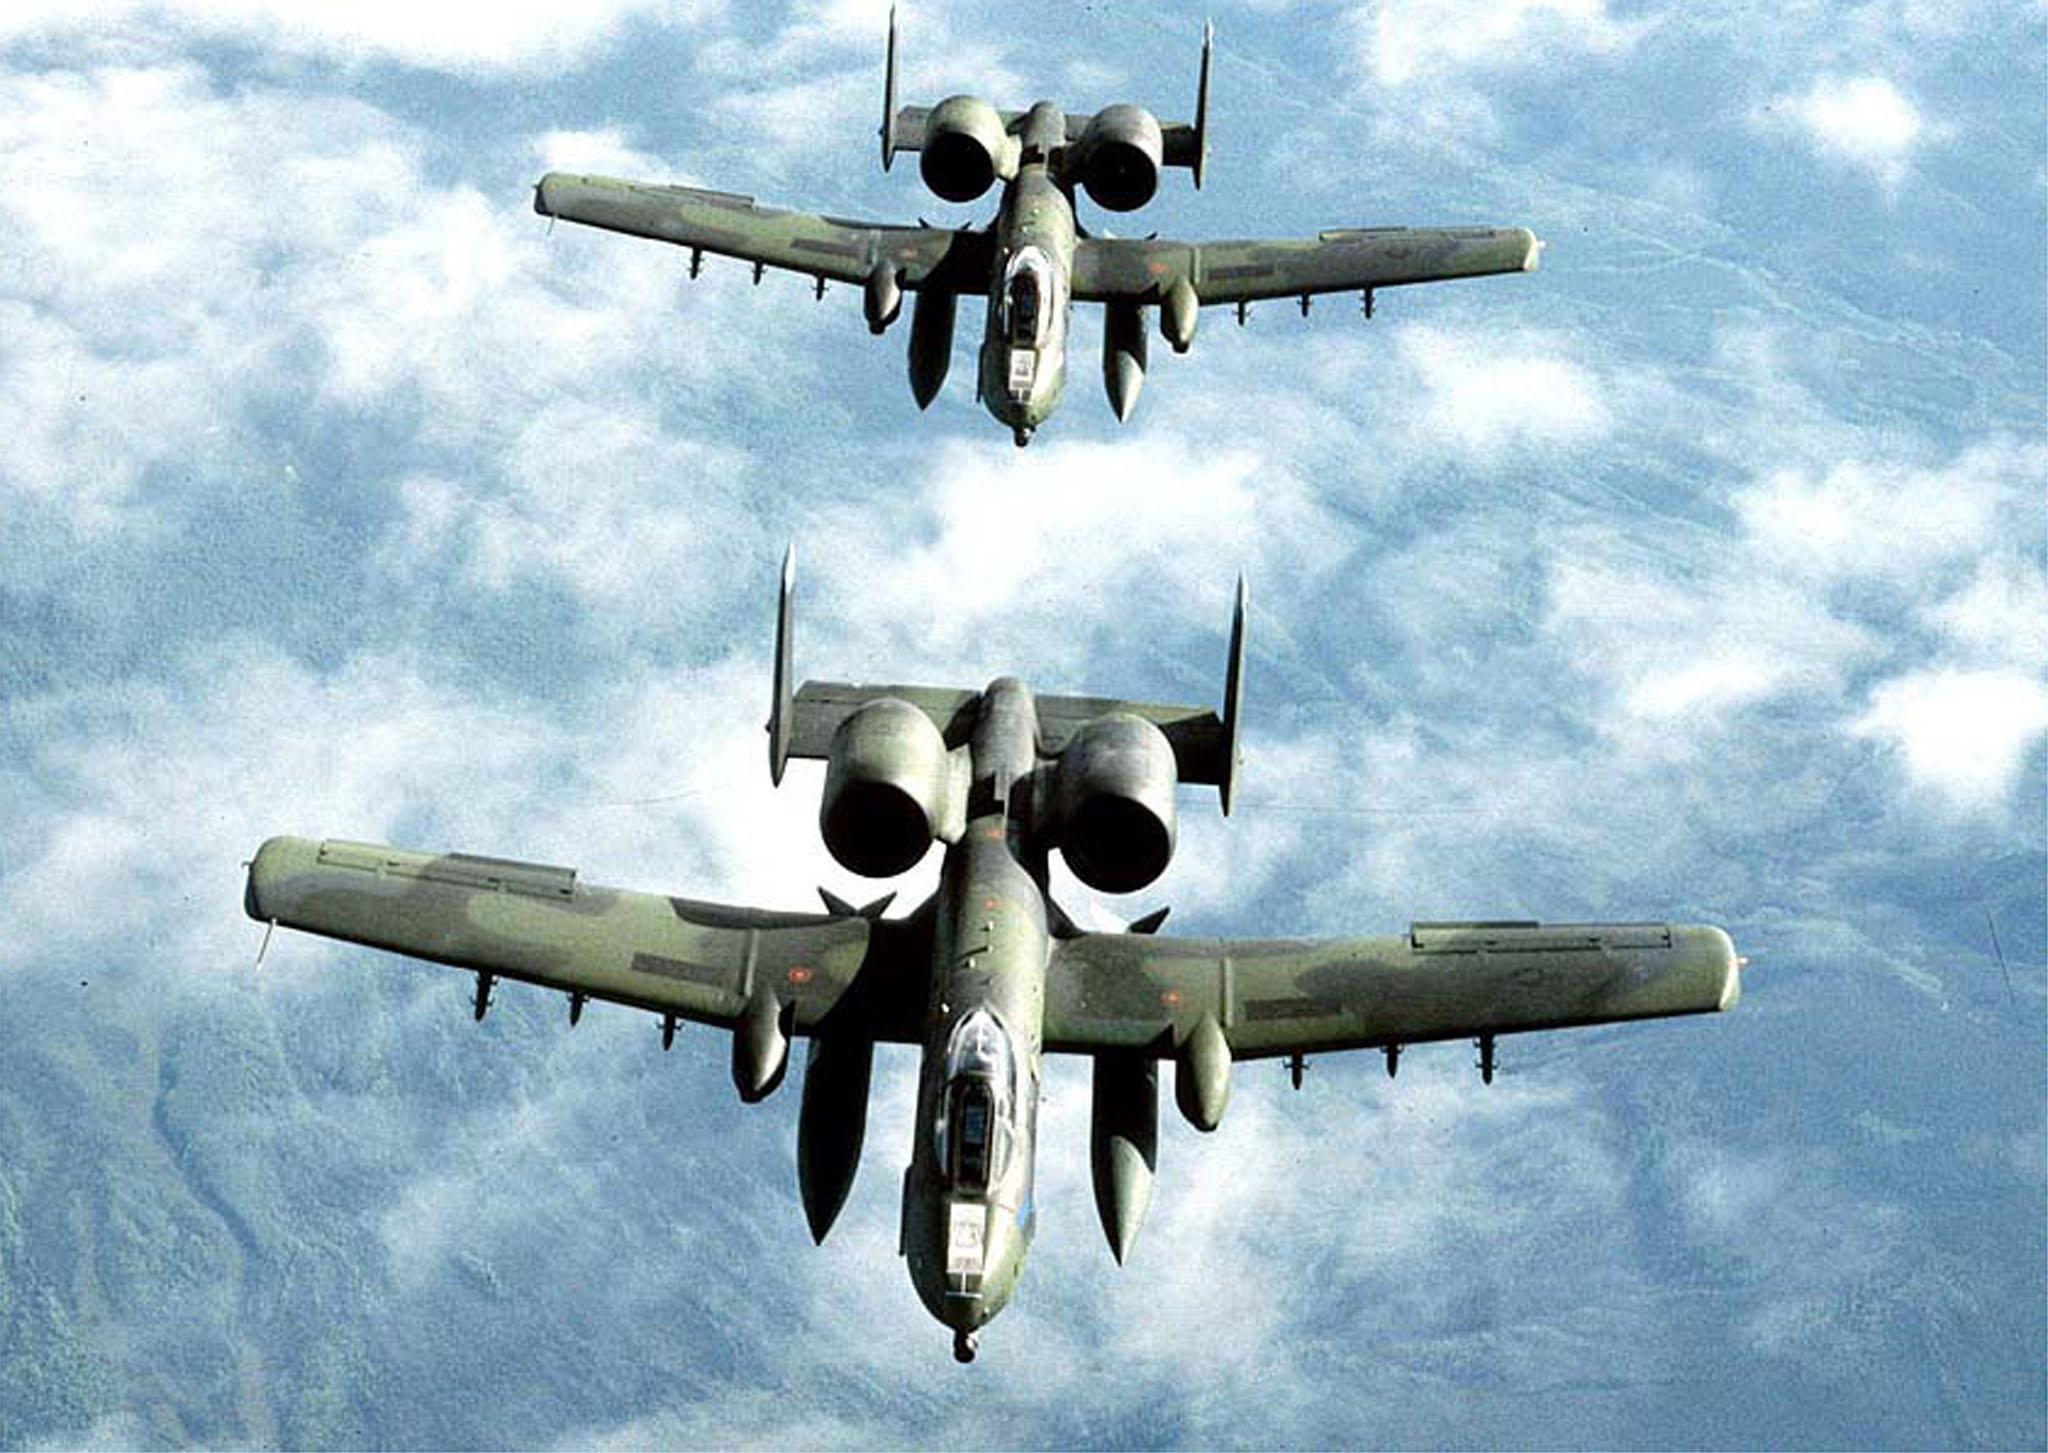 The US Air Force said A-10 Warthogs bombed Taliban militants in Afghanistan on Tuesday, 15 May